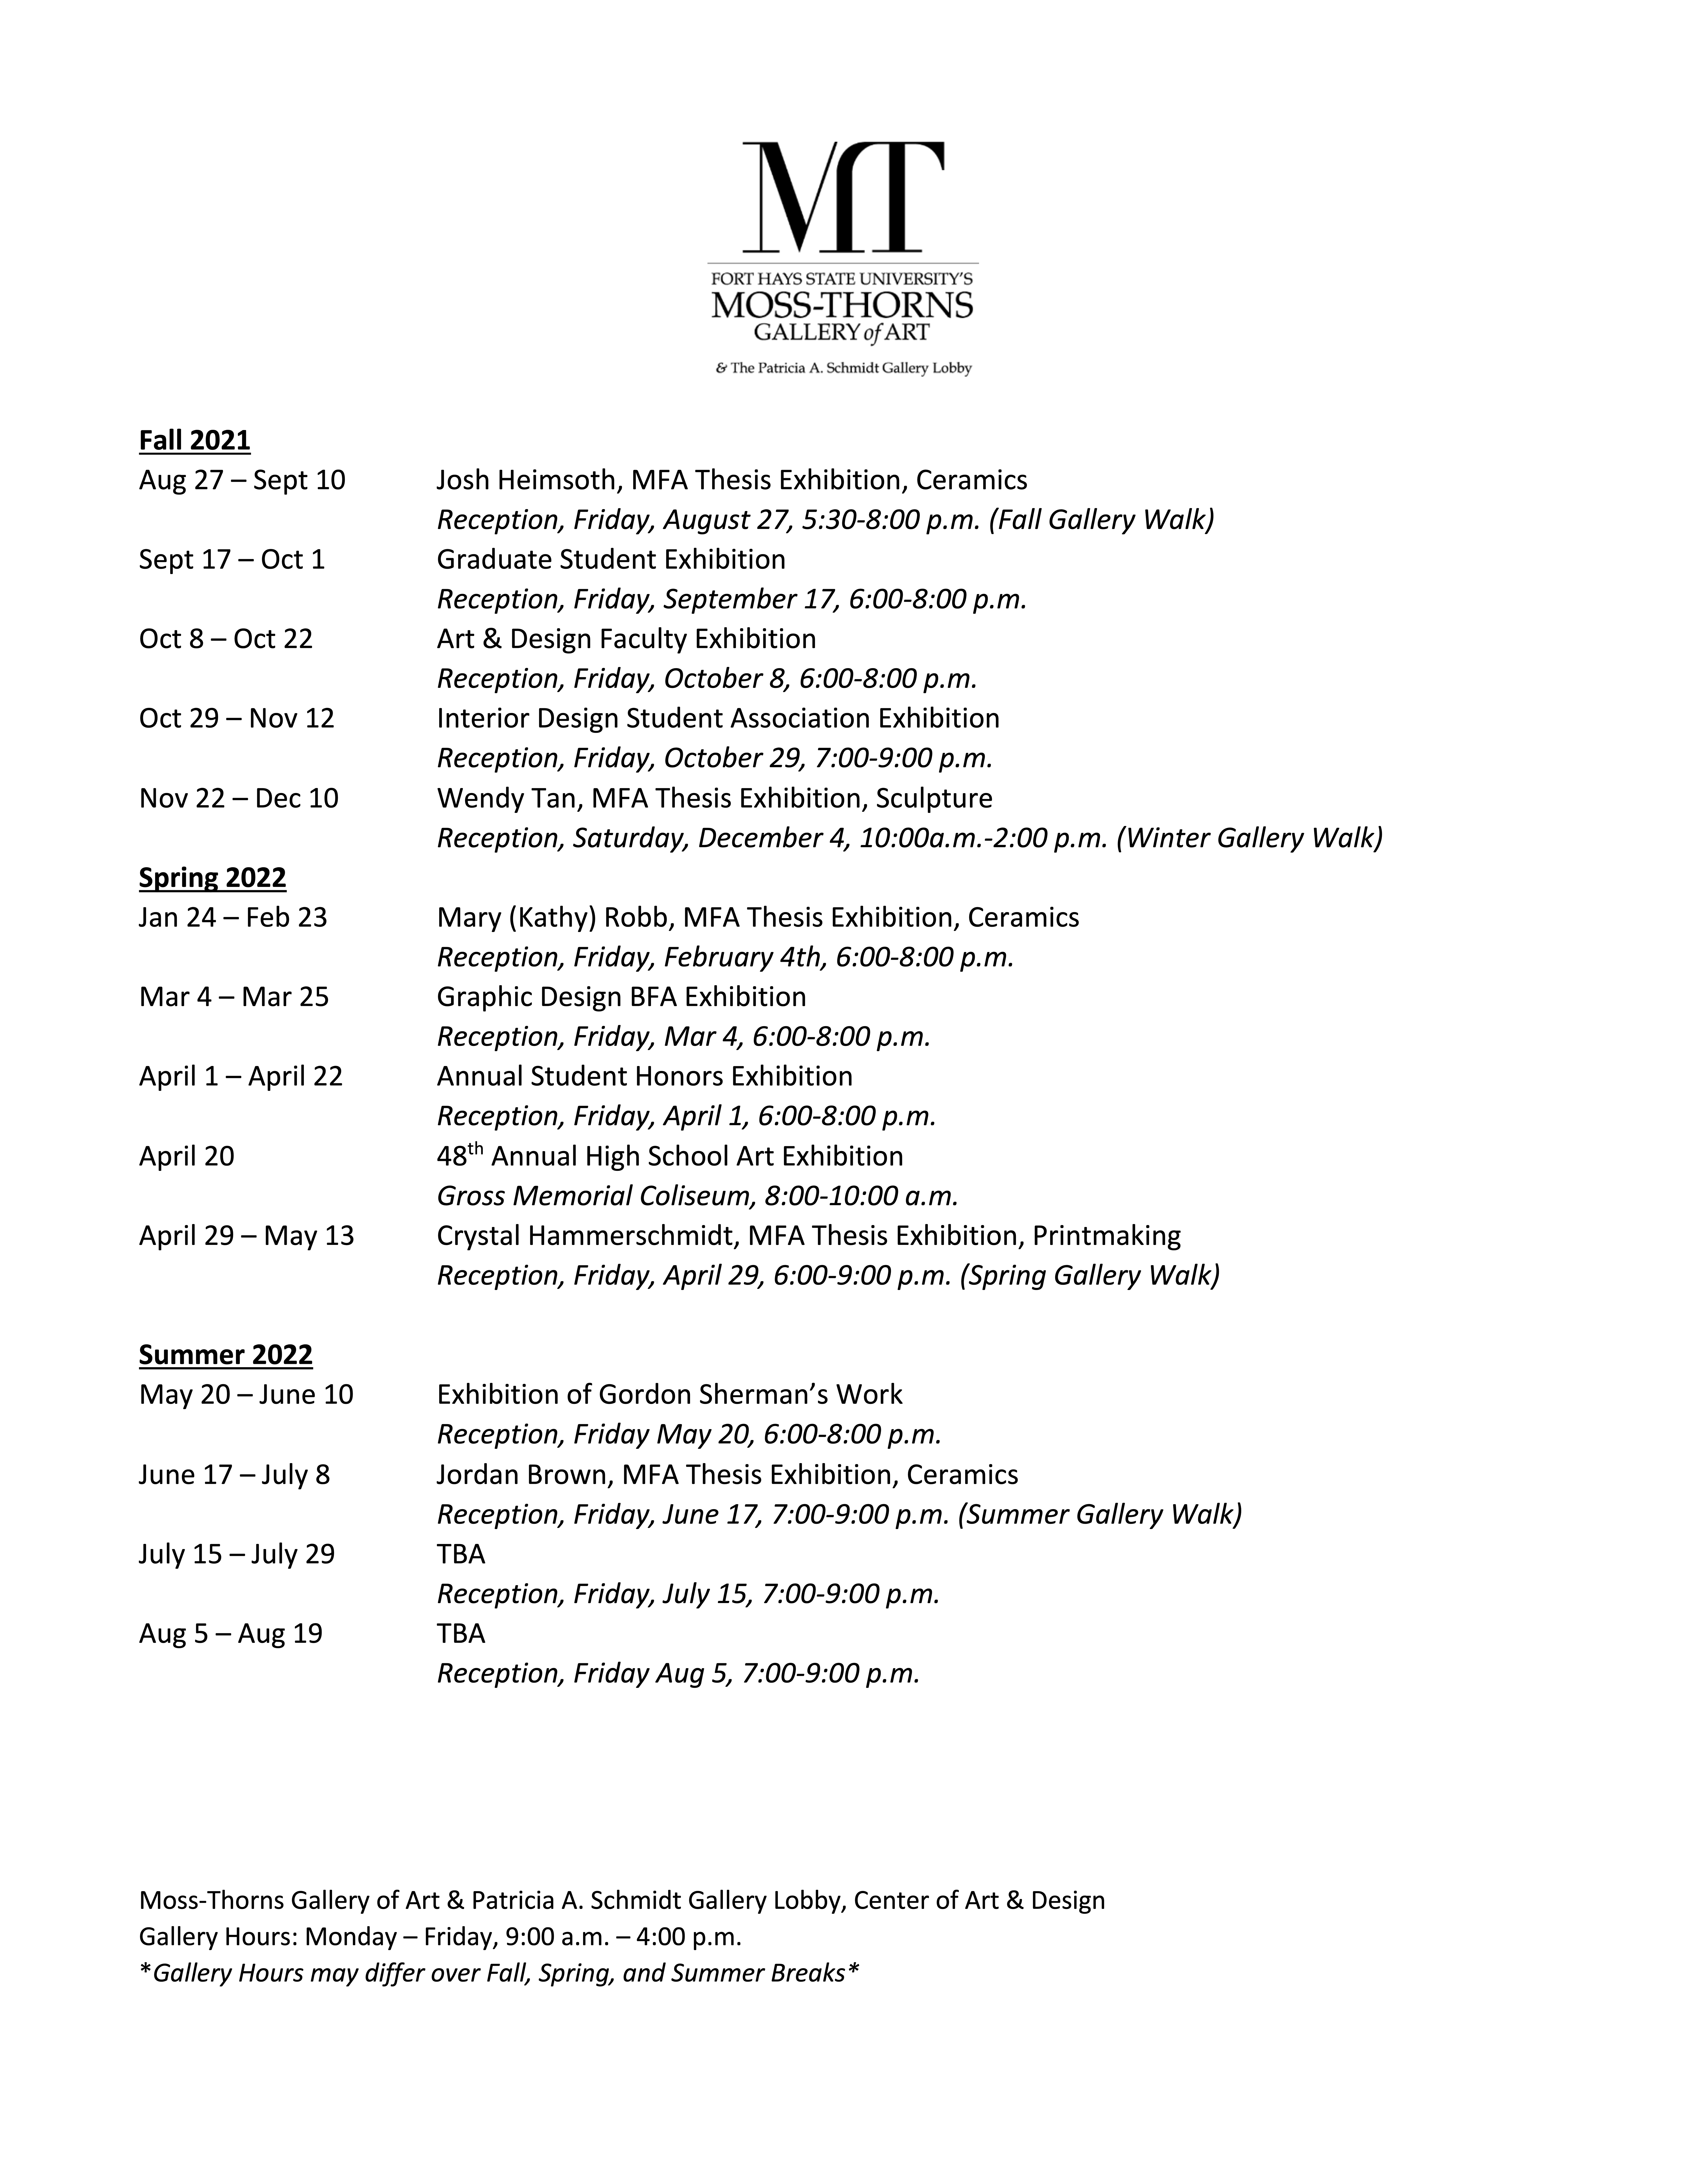 gallery-schedule-dates-2021-22.png